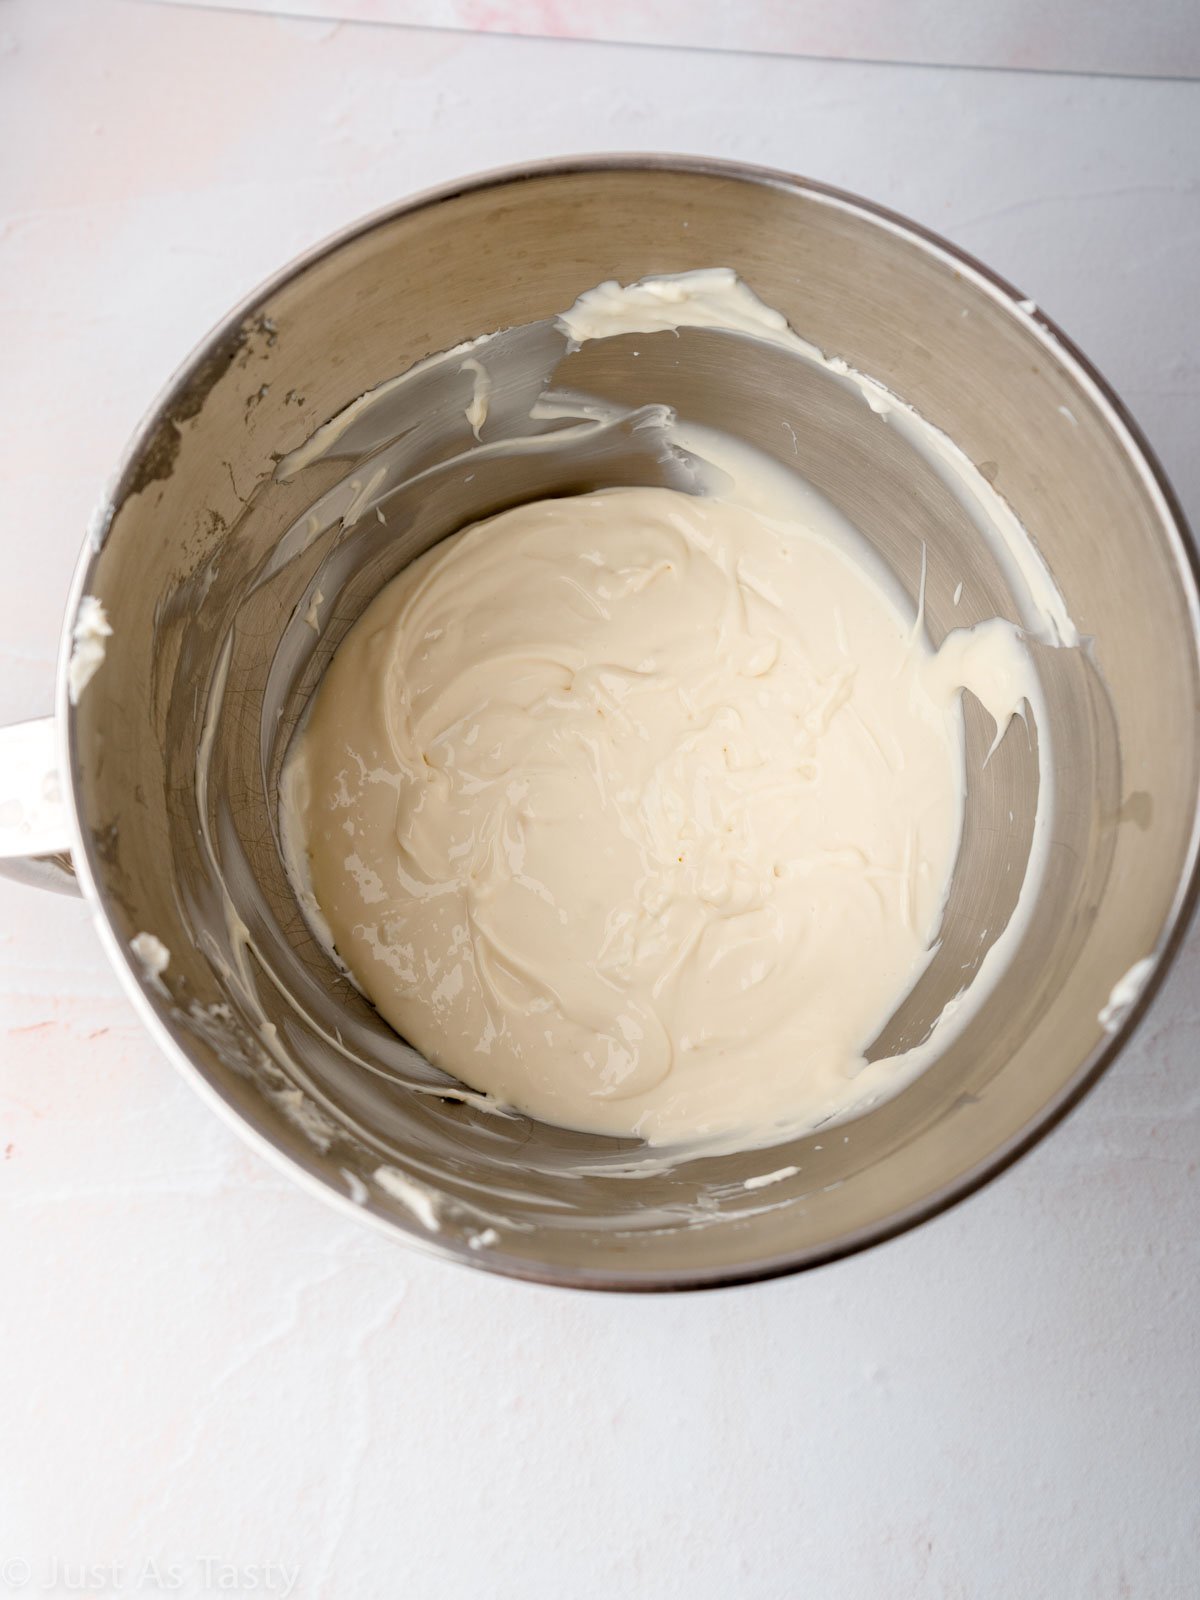 Cheesecake filling in a mixing bowl.